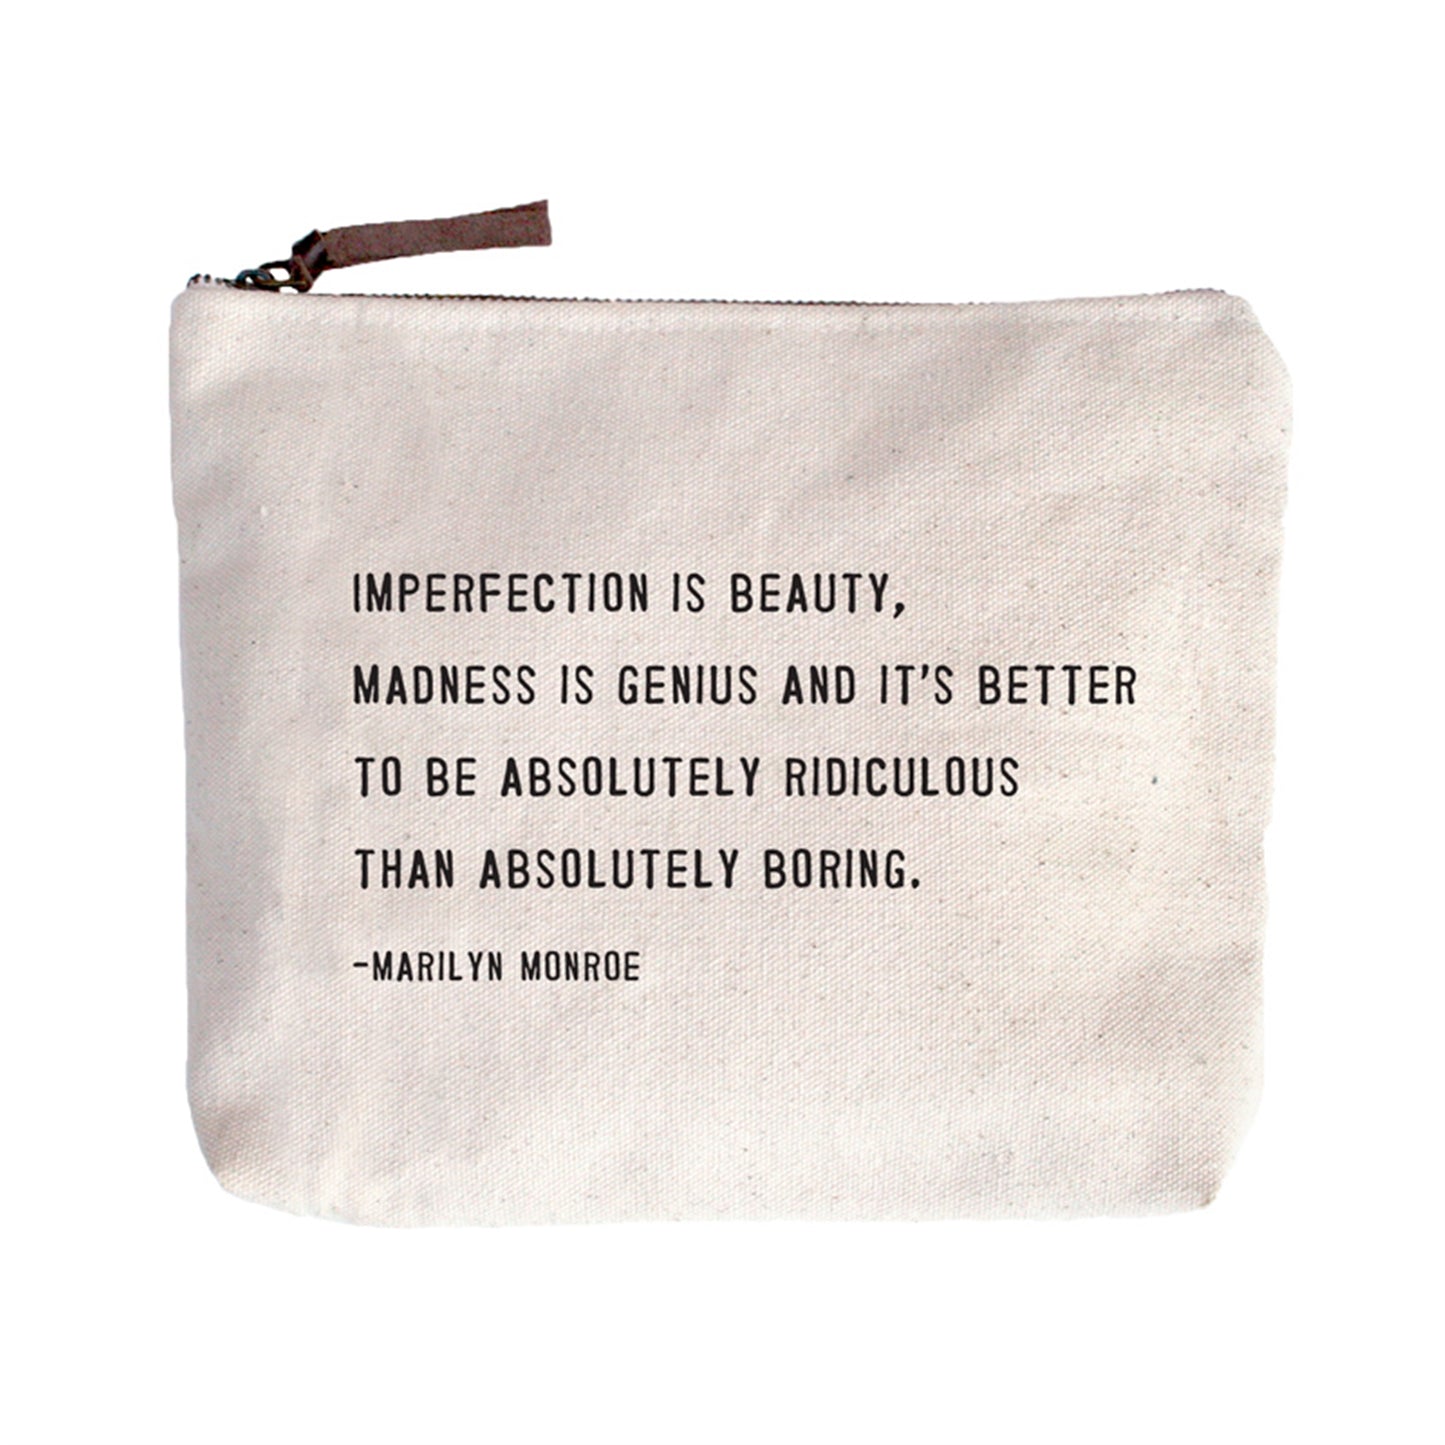 Canvas Zipper Bag - Imperfection is Beauty, Madness is Genius, and it's Better to be Absolutely Ridiculous Than Absolutely Boring -Marilyn Monroe - Mellow Monkey